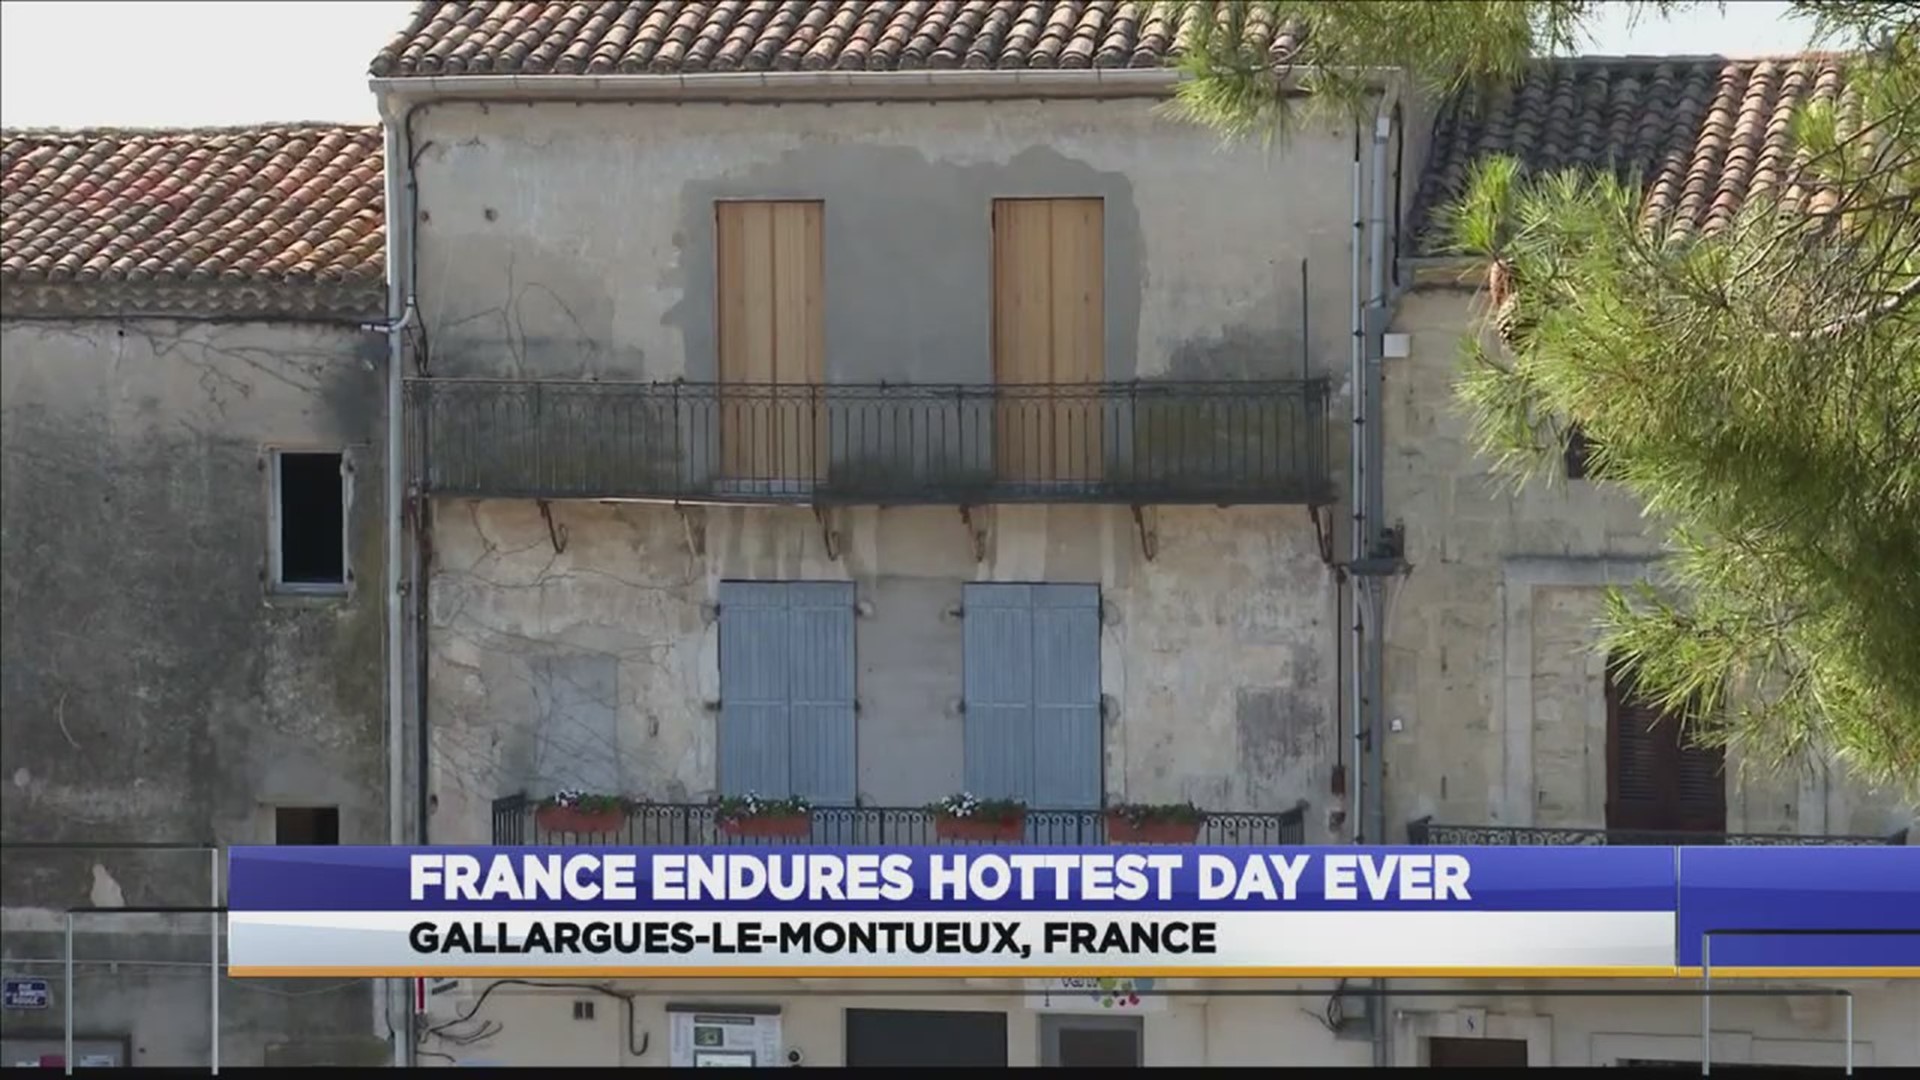 It was the hottest day on record for France on Friday.